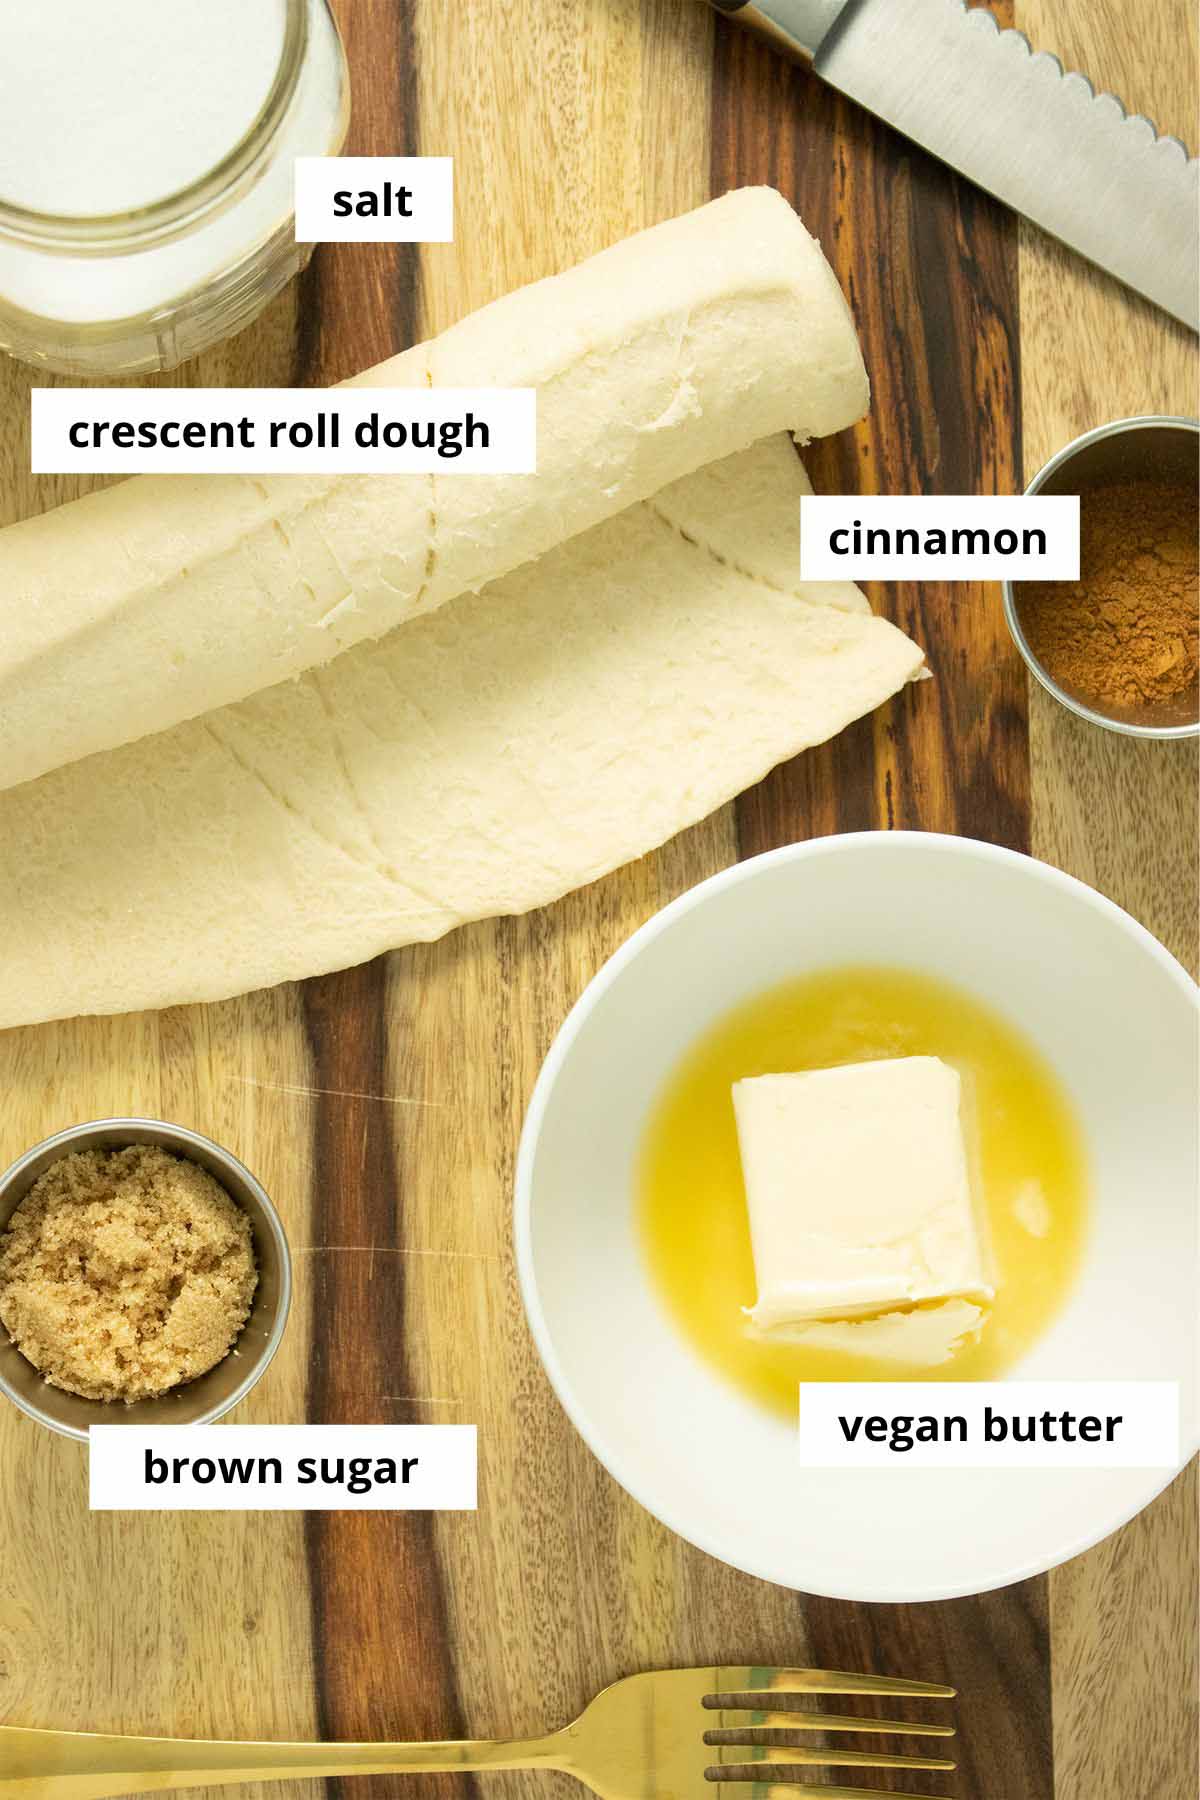 vegan cinnamon roll ingredients on a wooden cutting board with text labeling each one